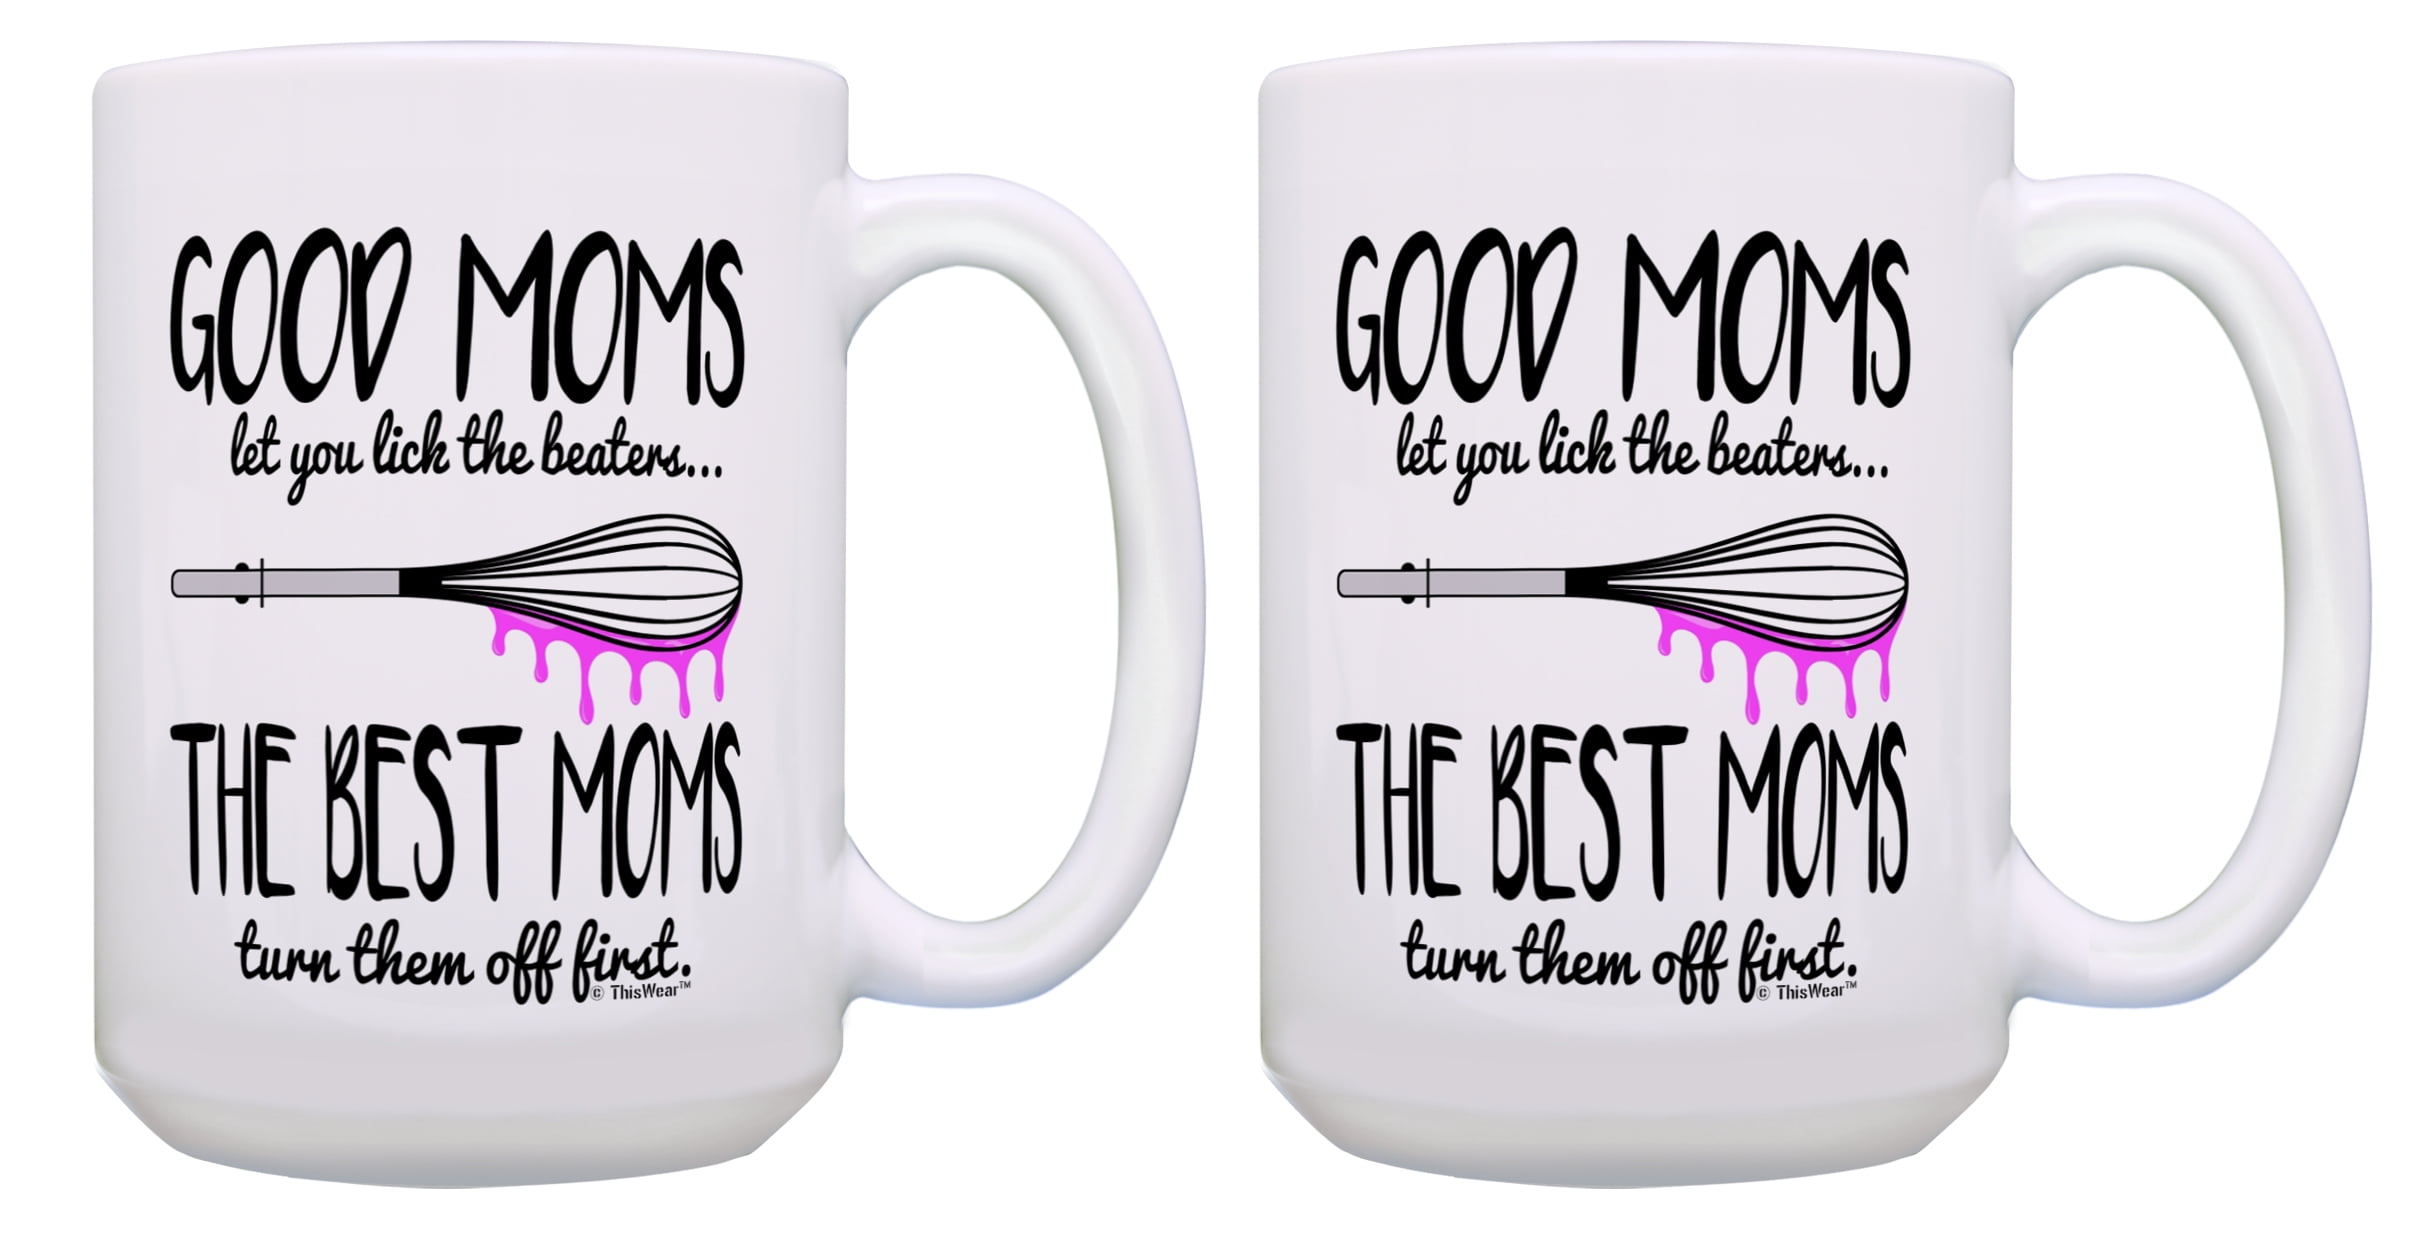 Funny Mom Gifts, Good Moms Let You Lick the Beaters Mug, Funny Mom